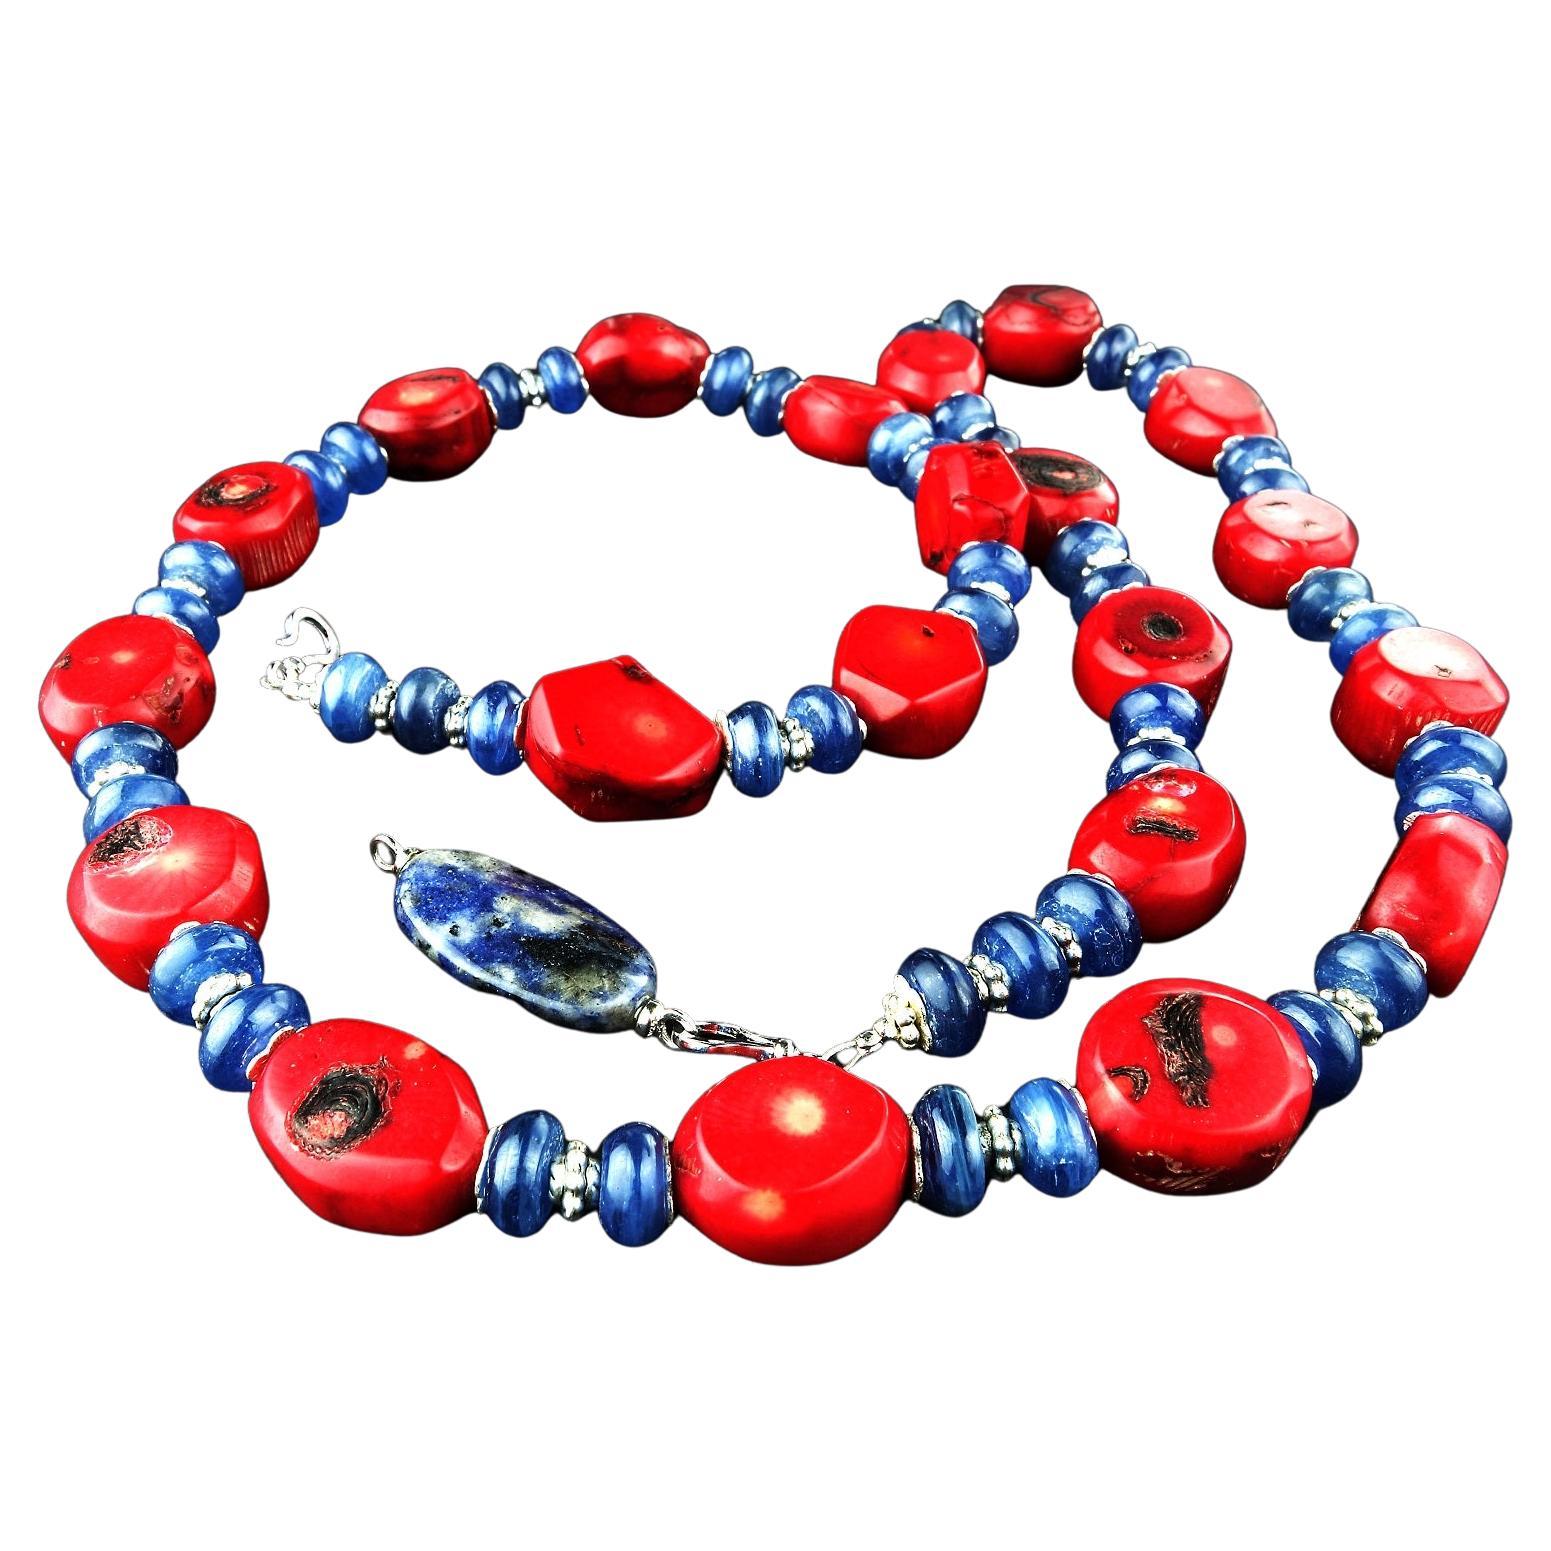 Artisan AJD Handmade, Red Coral and Blue Kyanite Southwest Style Necklace For Sale